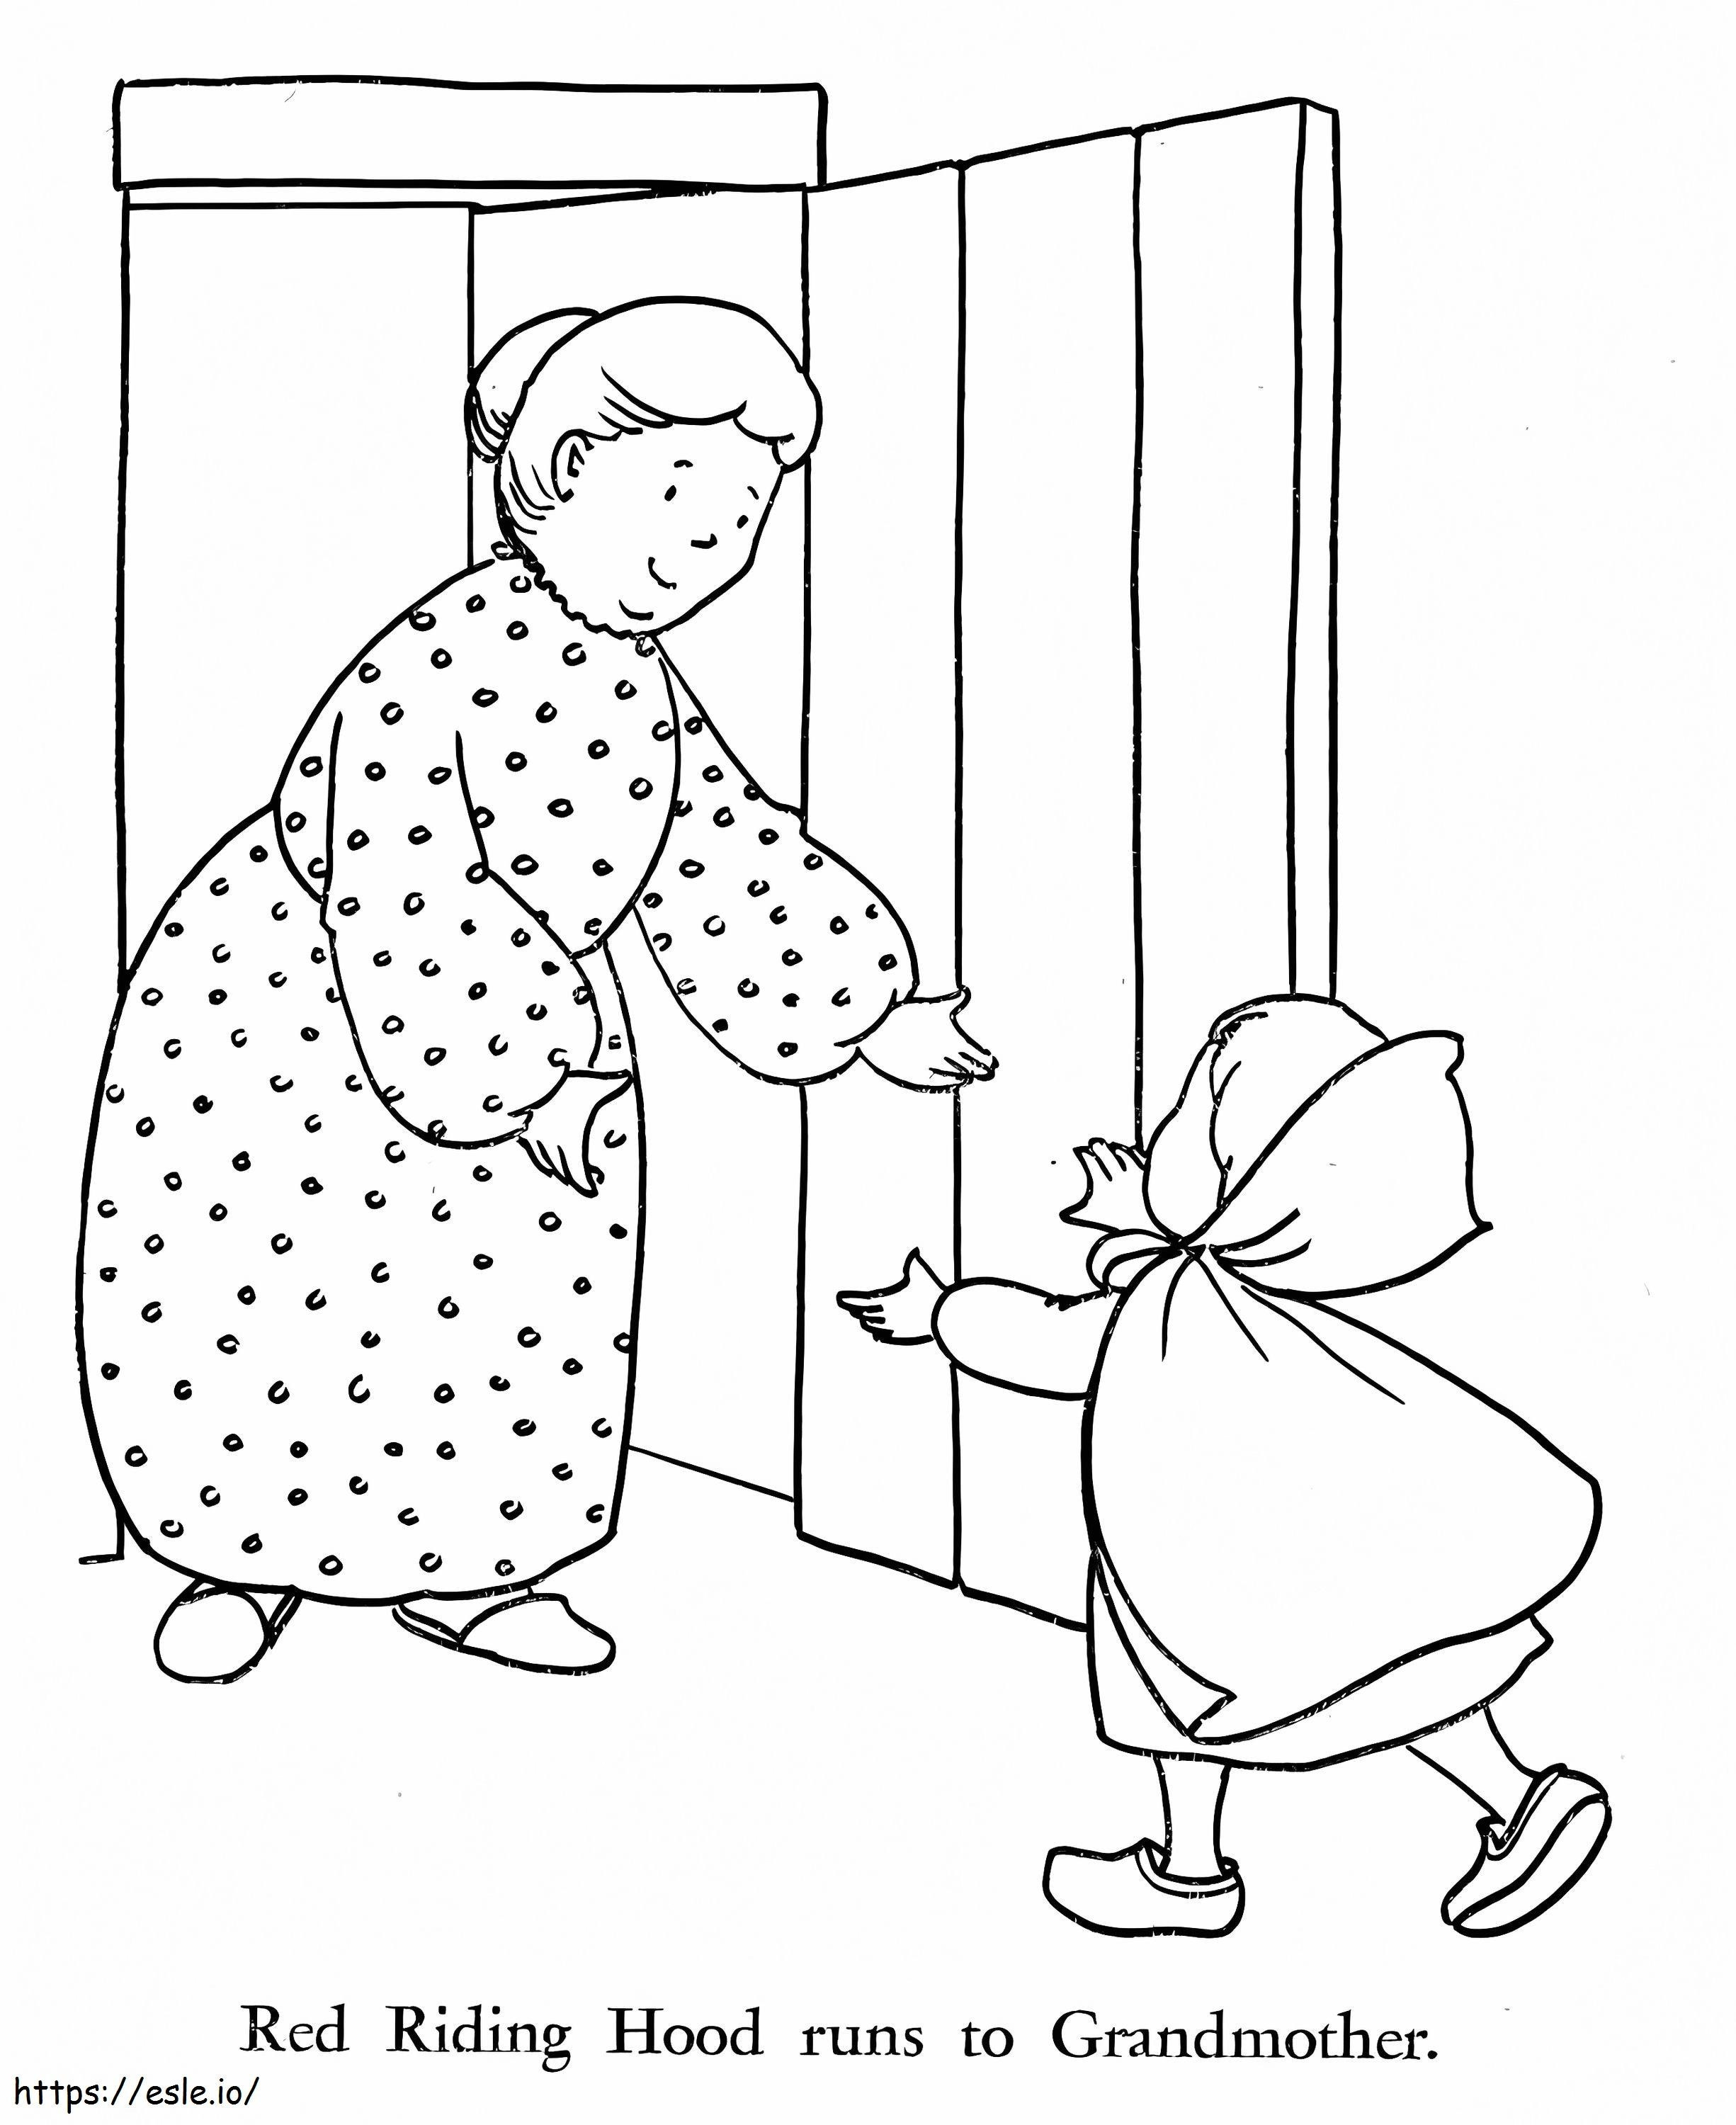 Red Riding Hood Runs To Grandmother coloring page